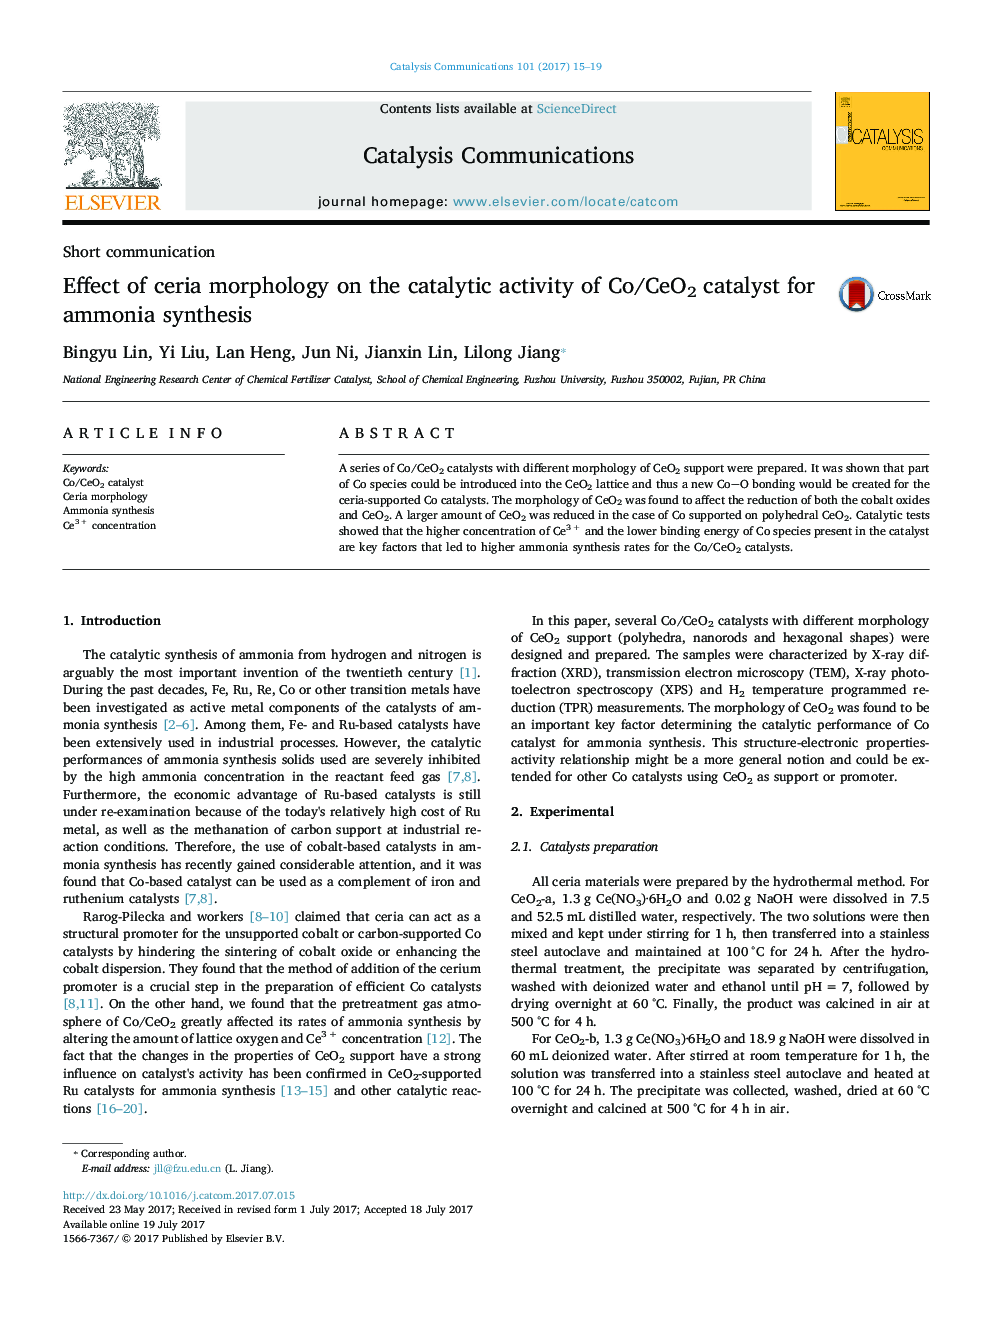 Effect of ceria morphology on the catalytic activity of Co/CeO2 catalyst for ammonia synthesis